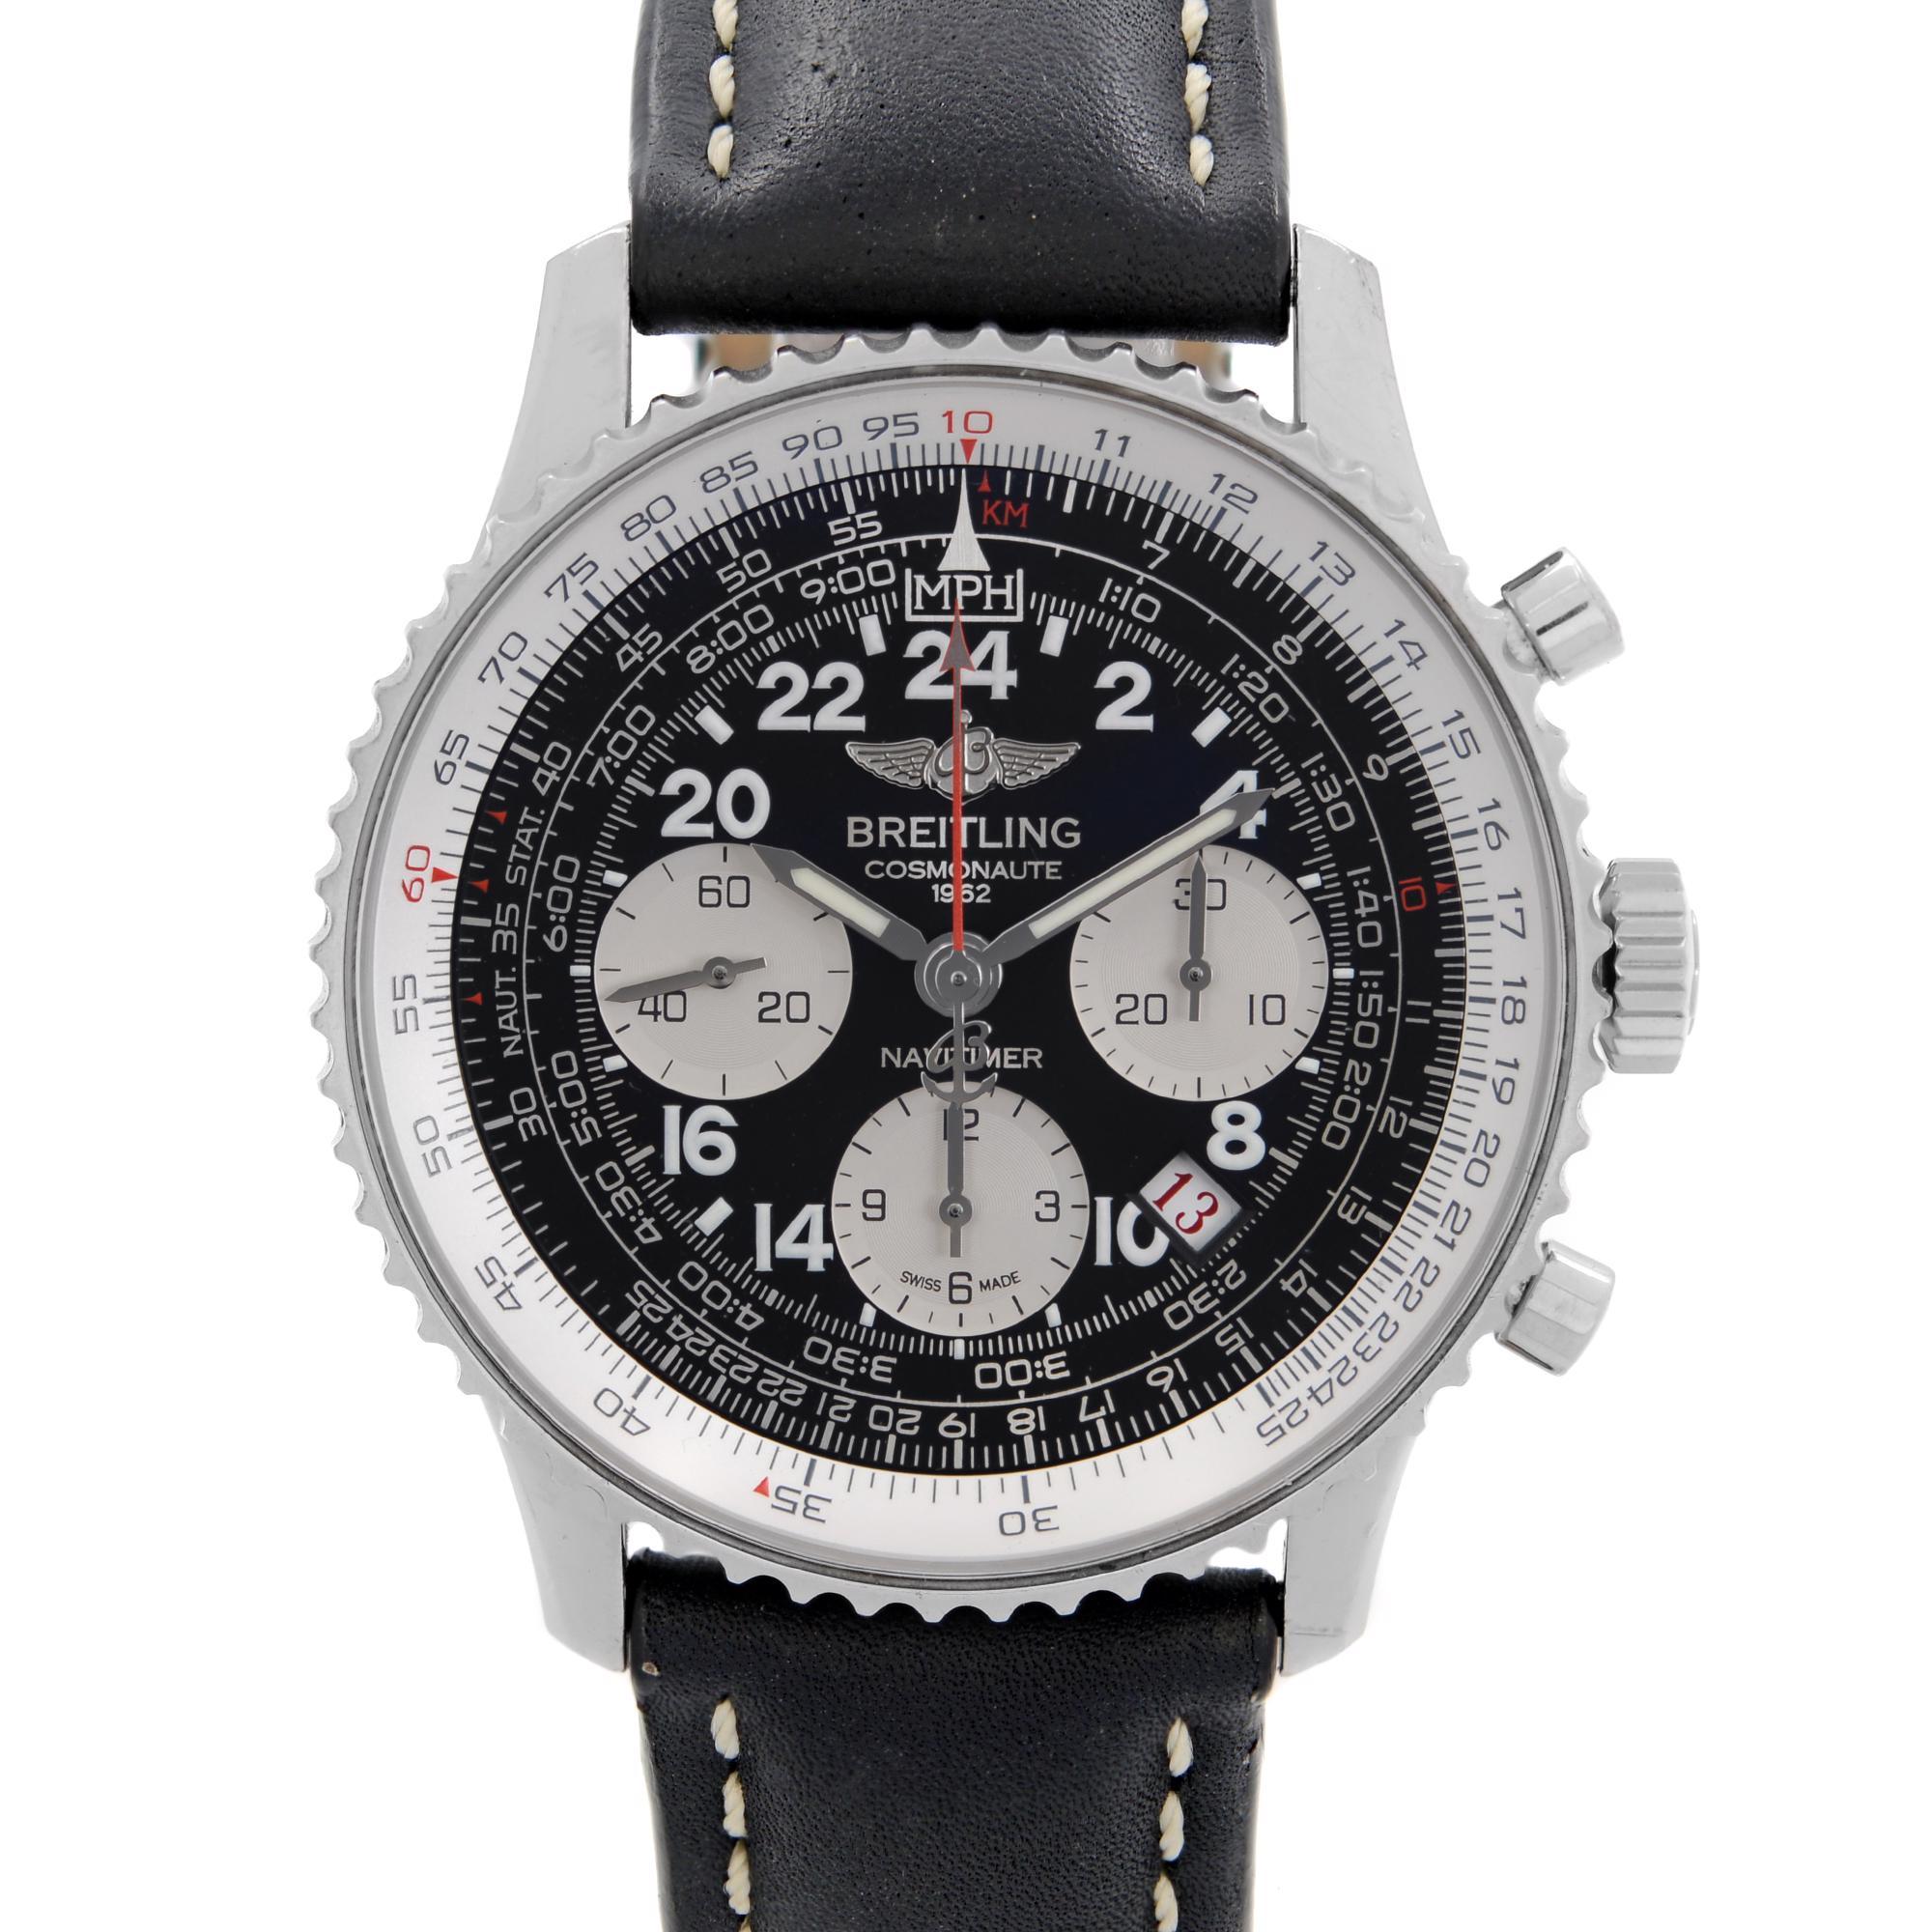 Pre-owned Breitling Limited Edition Navitimer Cosmonaute 